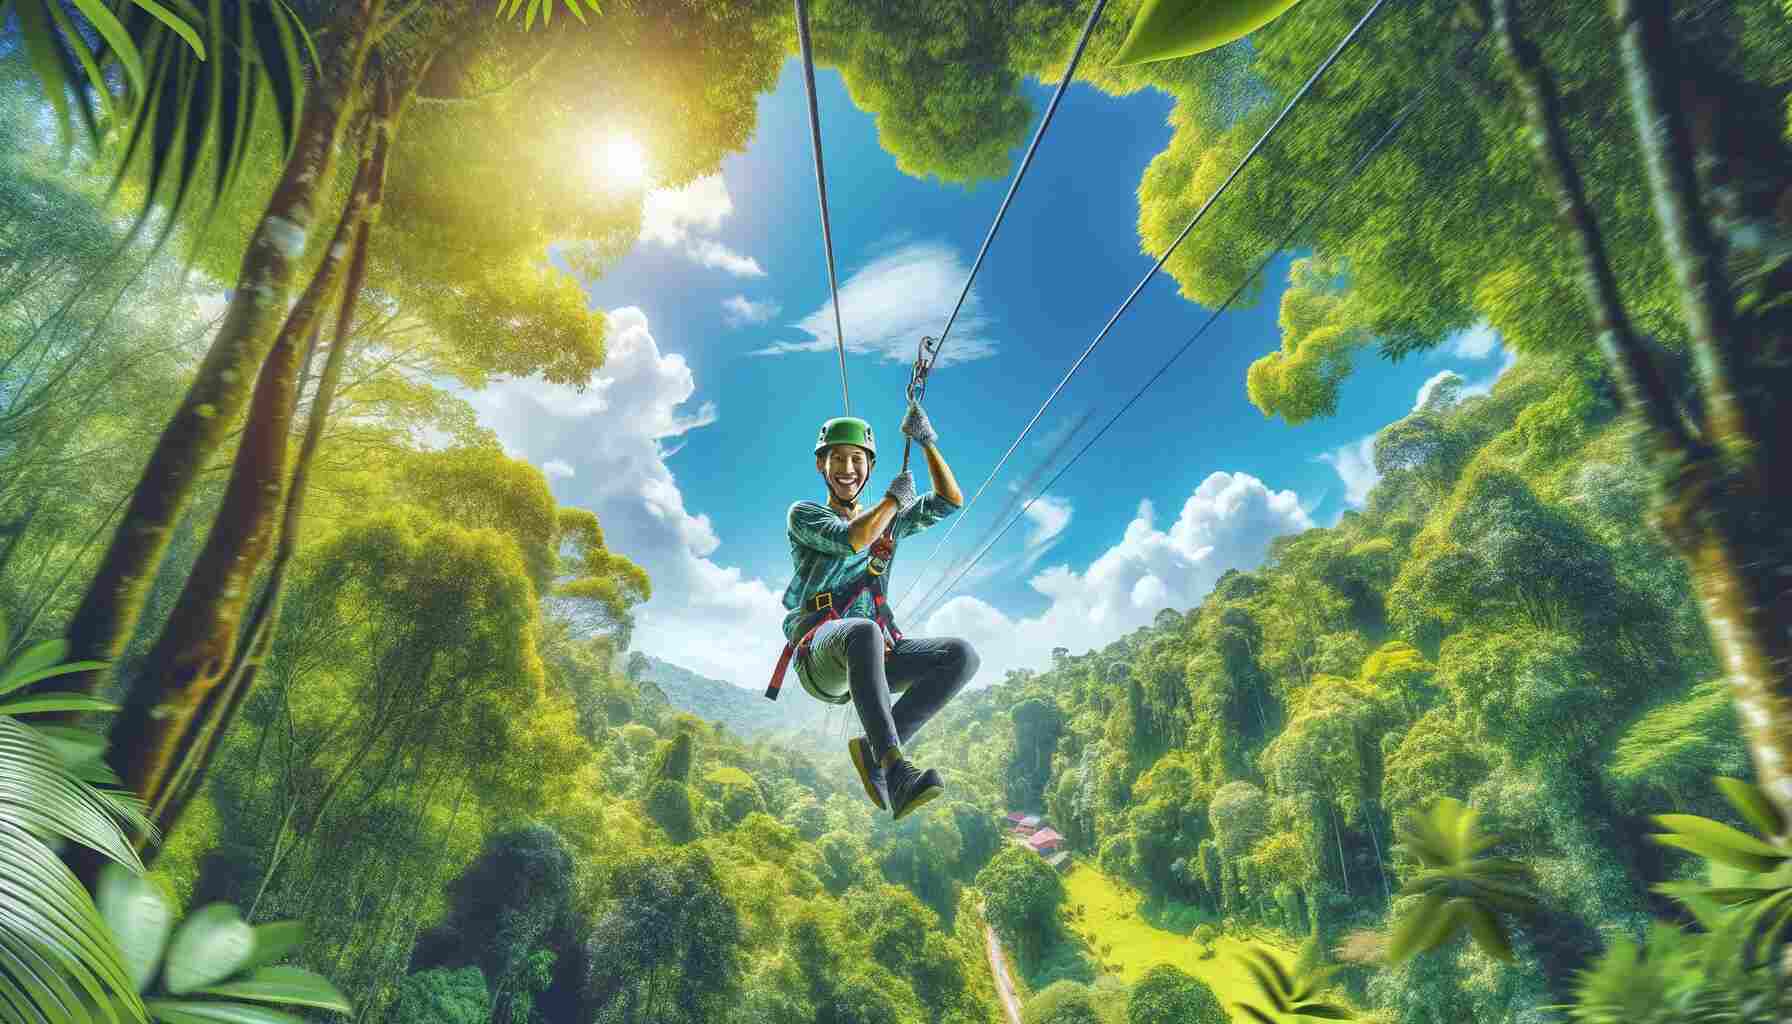 Person gliding through a lush forest canopy on a zipline, wearing a helmet and harness, smiling and looking excited, with vibrant green trees and a clear blue sky in the background.